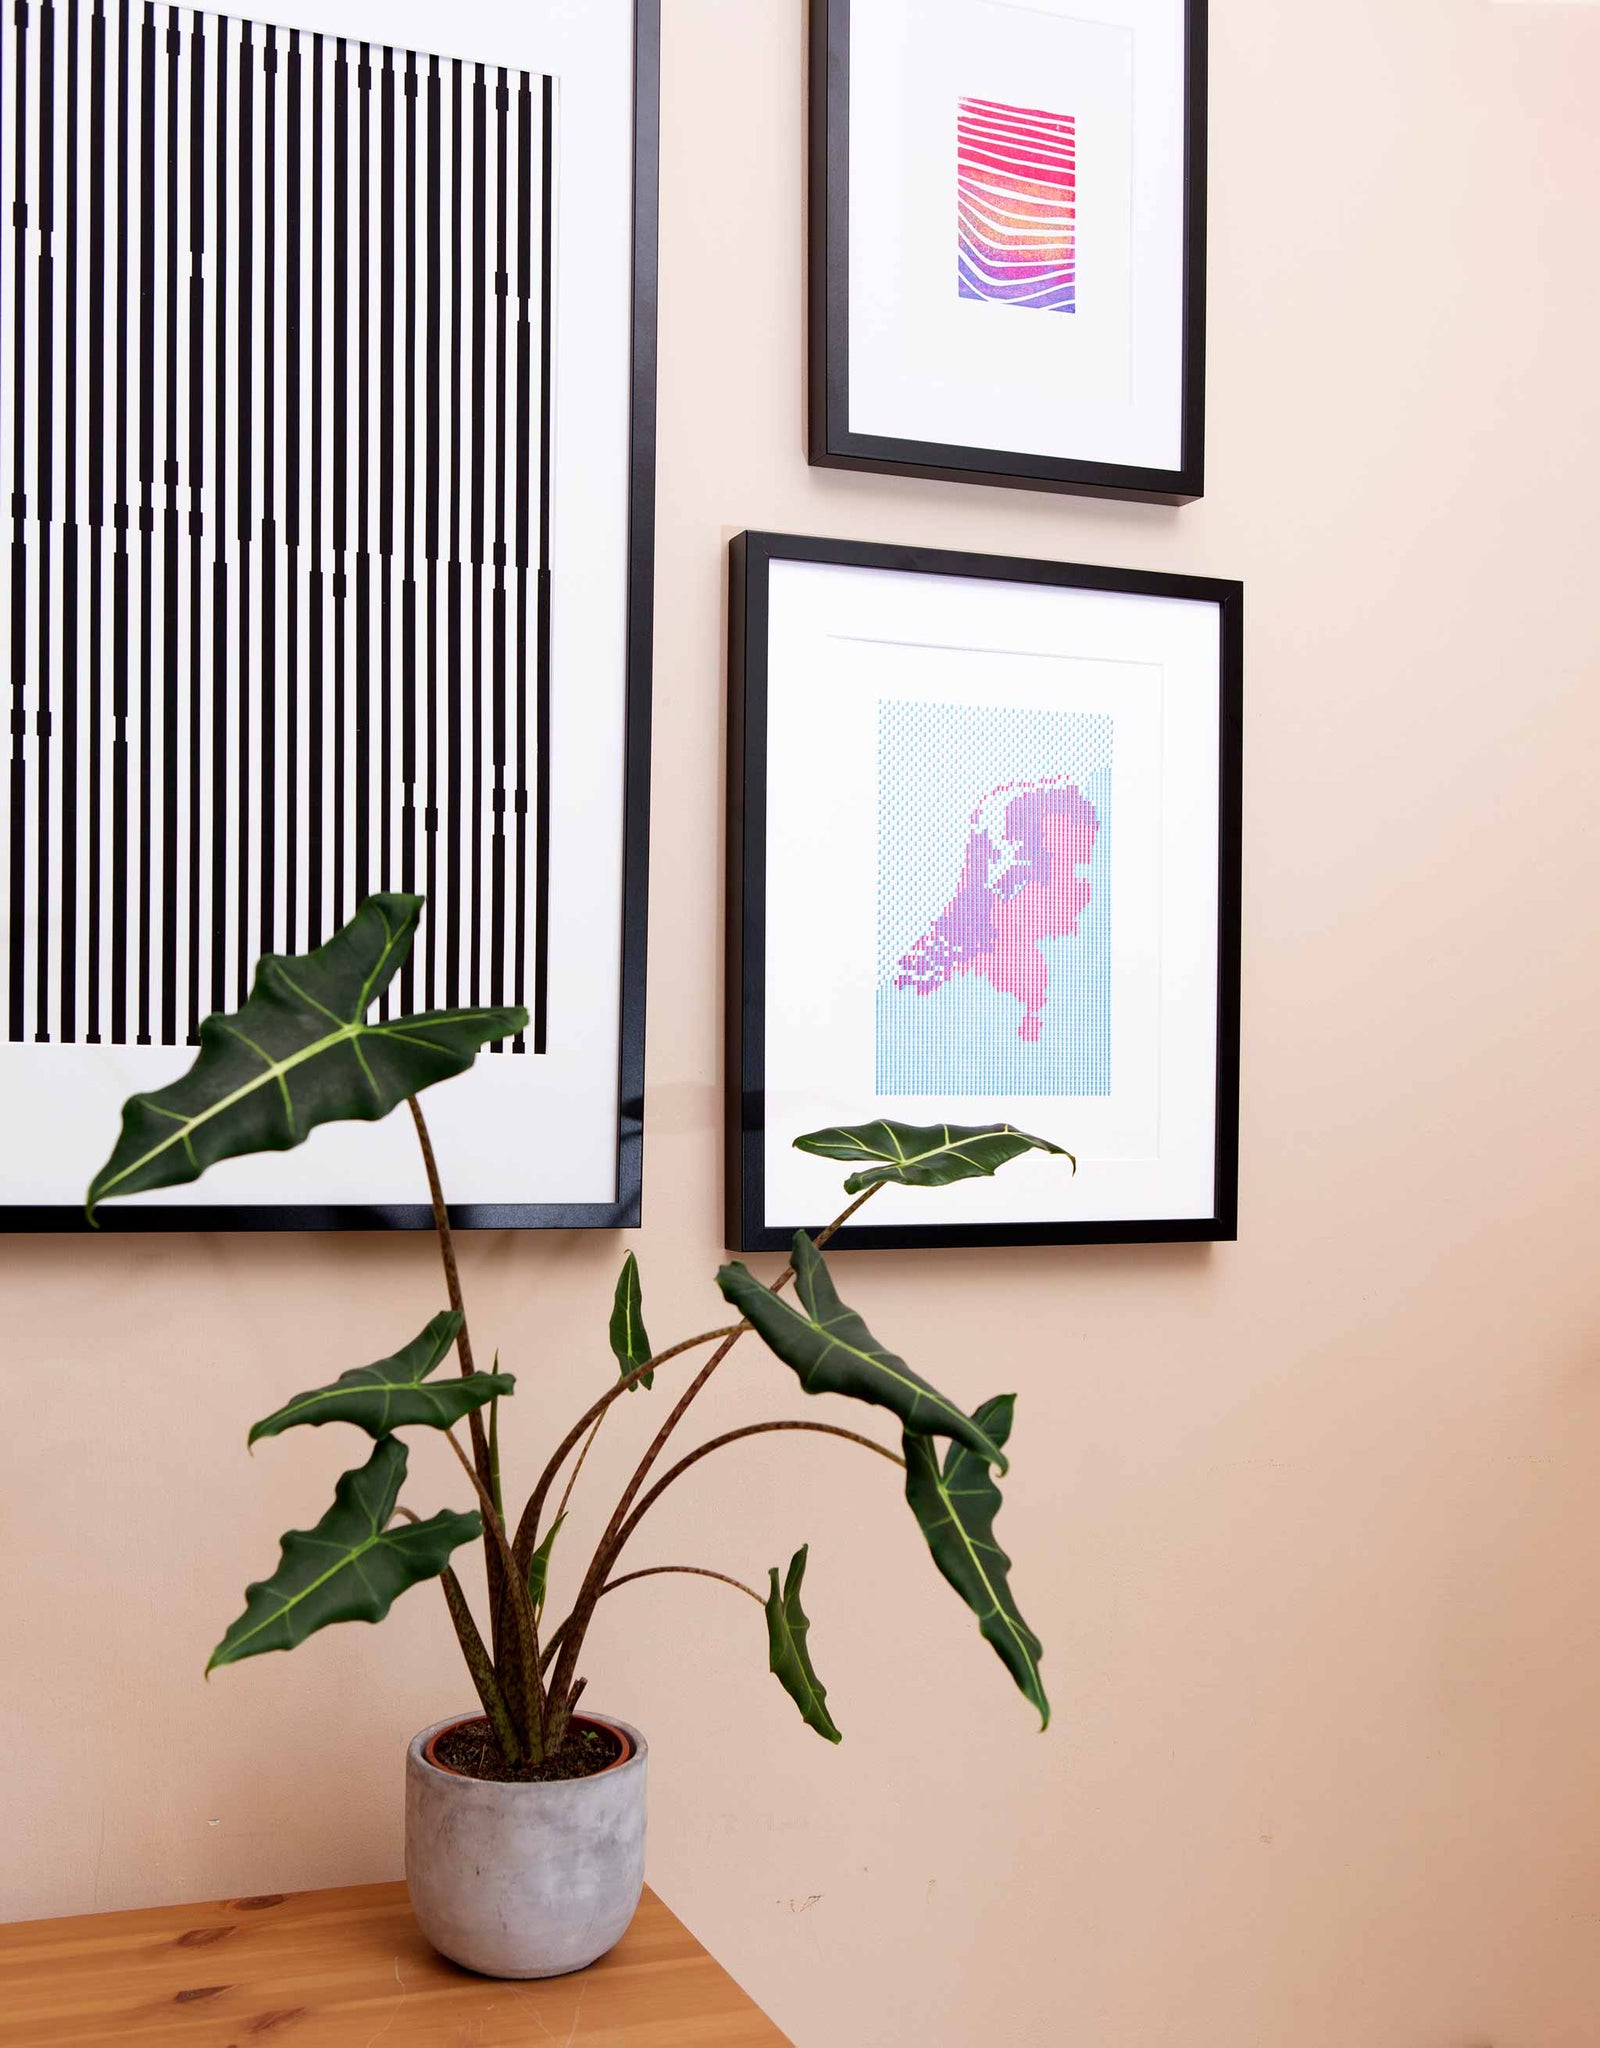 Angle view of Letterpress patterned map of The Netherlands in magenta and blue. Shown in black frame on wall with plant and other art.